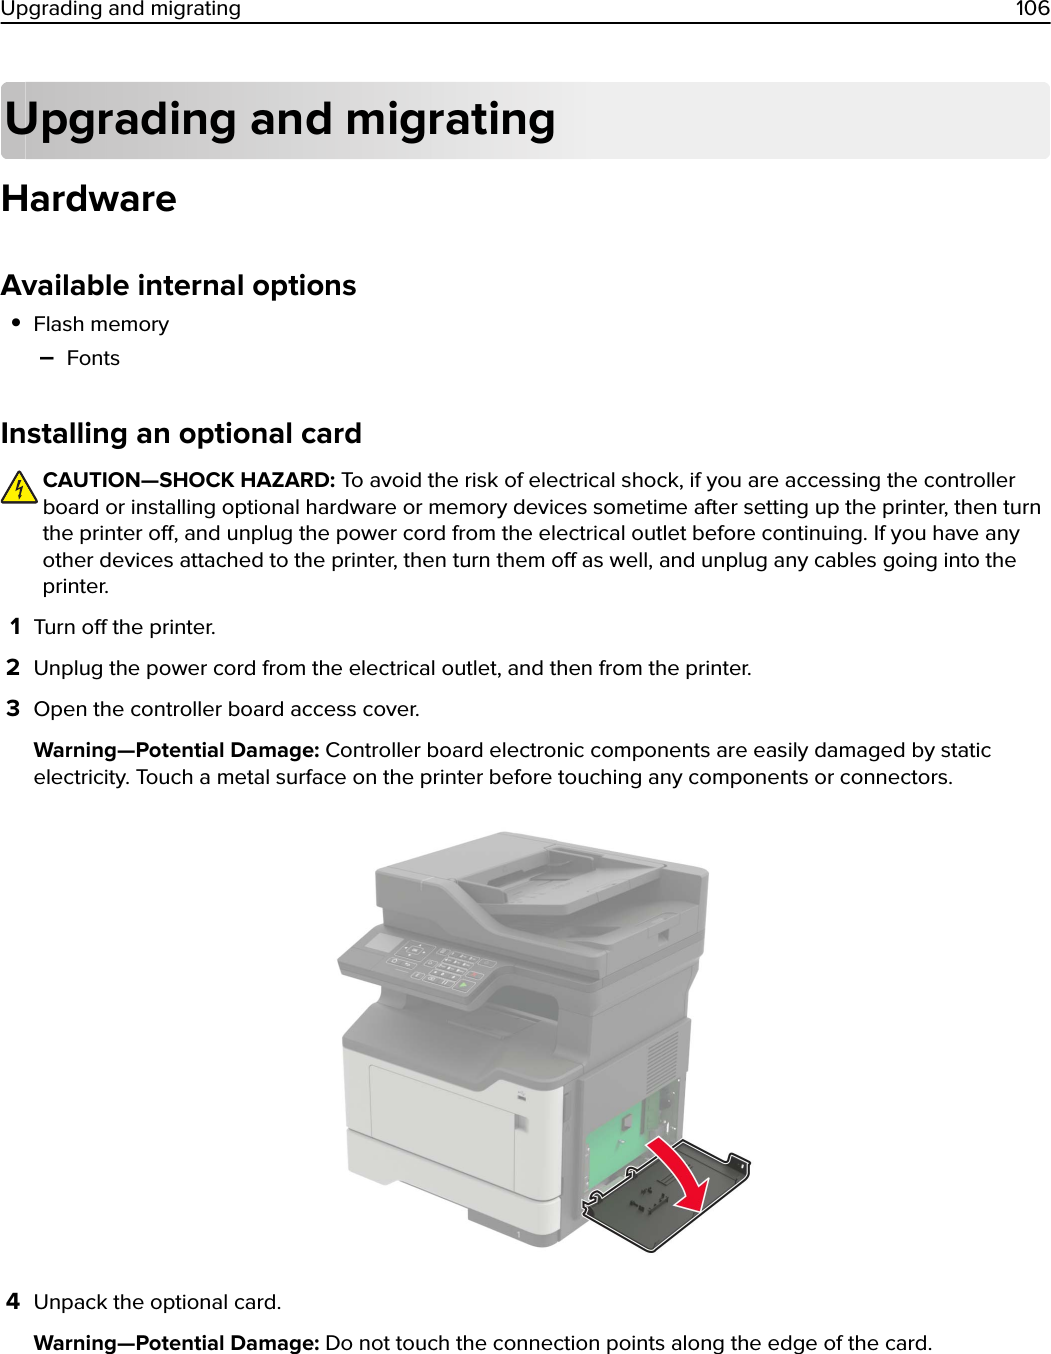 Upgrading and migratingHardwareAvailable internal options•Flash memory–FontsInstalling an optional cardCAUTION—SHOCK HAZARD: To avoid the risk of electrical shock, if you are accessing the controllerboard or installing optional hardware or memory devices sometime after setting up the printer, then turnthe printer o, and unplug the power cord from the electrical outlet before continuing. If you have anyother devices attached to the printer, then turn them o as well, and unplug any cables going into theprinter.1Turn o the printer.2Unplug the power cord from the electrical outlet, and then from the printer.3Open the controller board access cover.Warning—Potential Damage: Controller board electronic components are easily damaged by staticelectricity. Touch a metal surface on the printer before touching any components or connectors.4Unpack the optional card.Warning—Potential Damage: Do not touch the connection points along the edge of the card.Upgrading and migrating 106